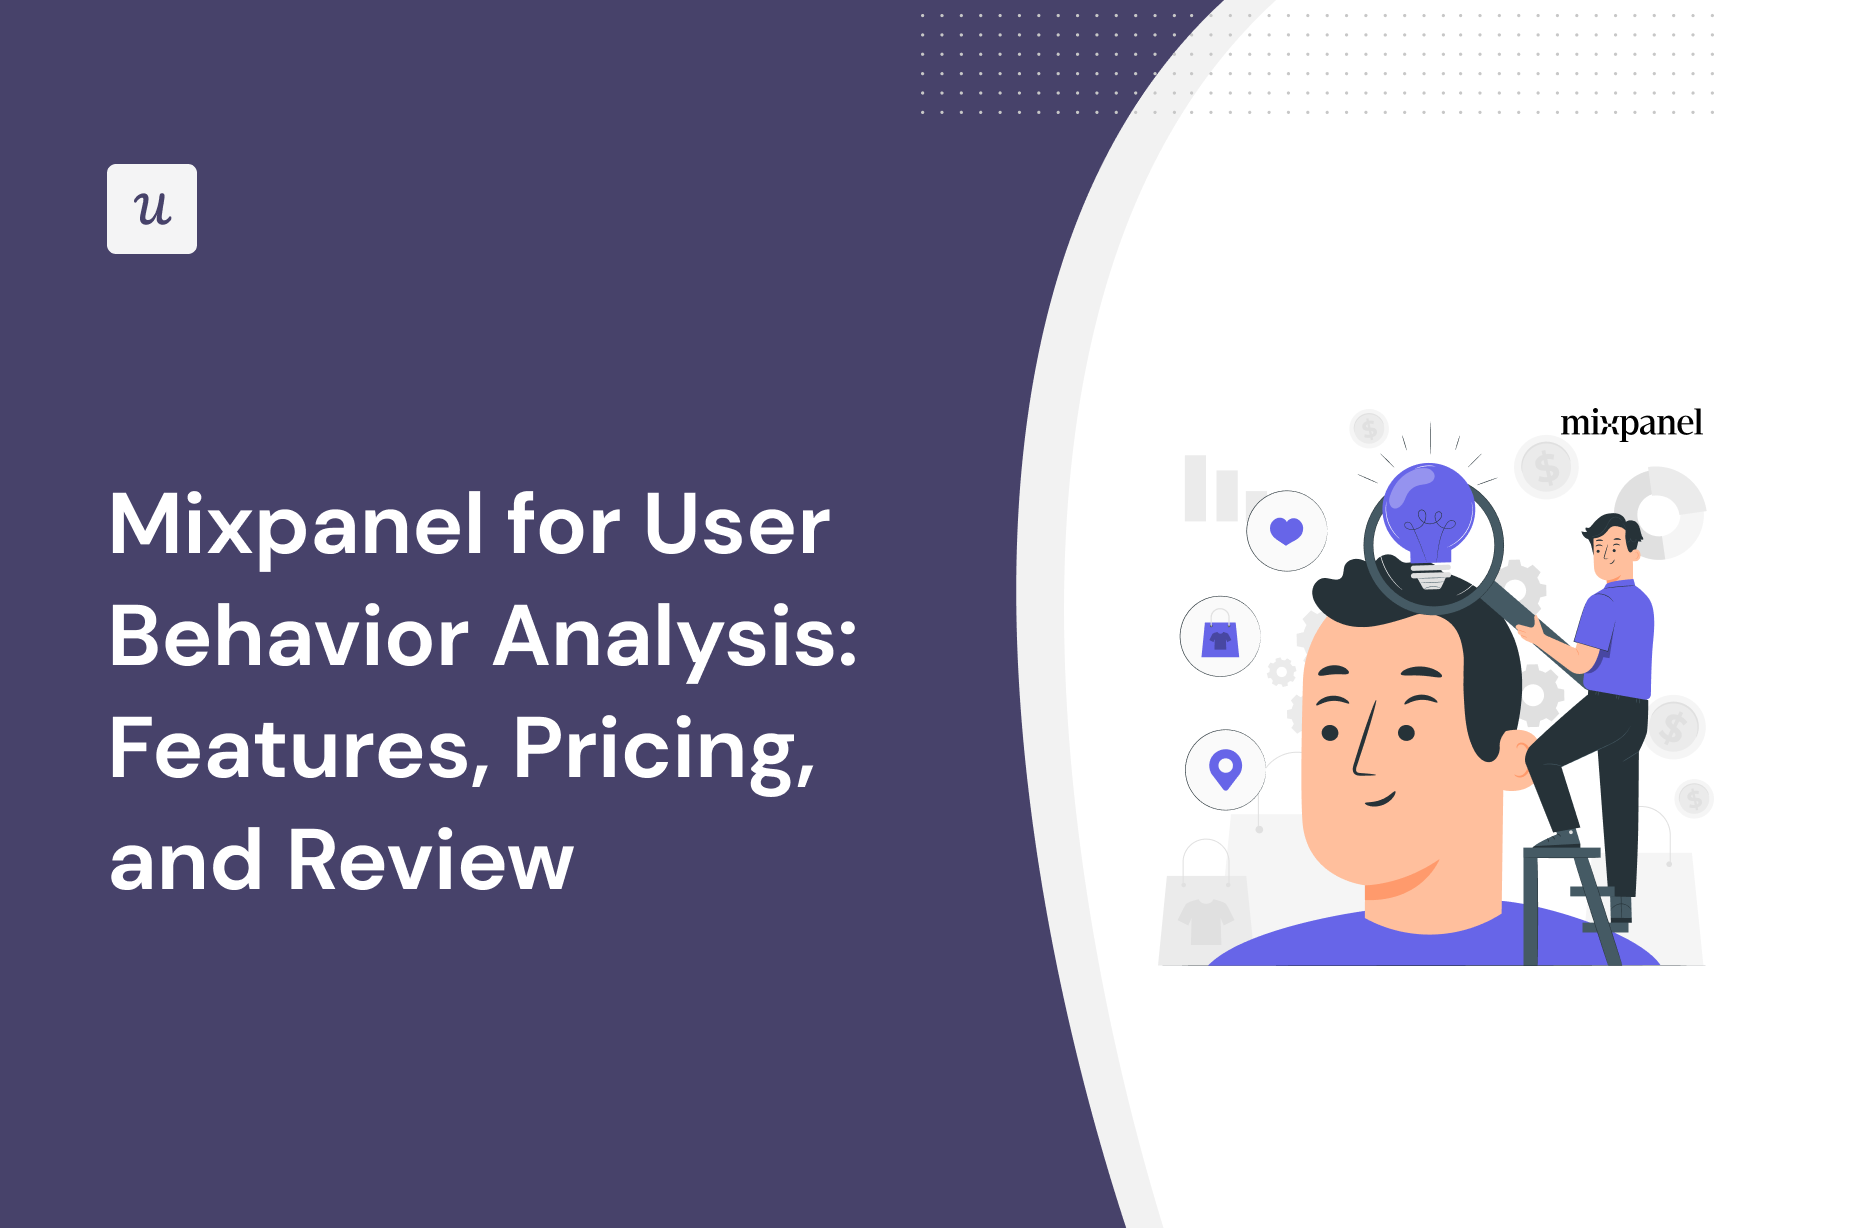 Mixpanel for User Behavior Analysis: Features, Pricing, and Review